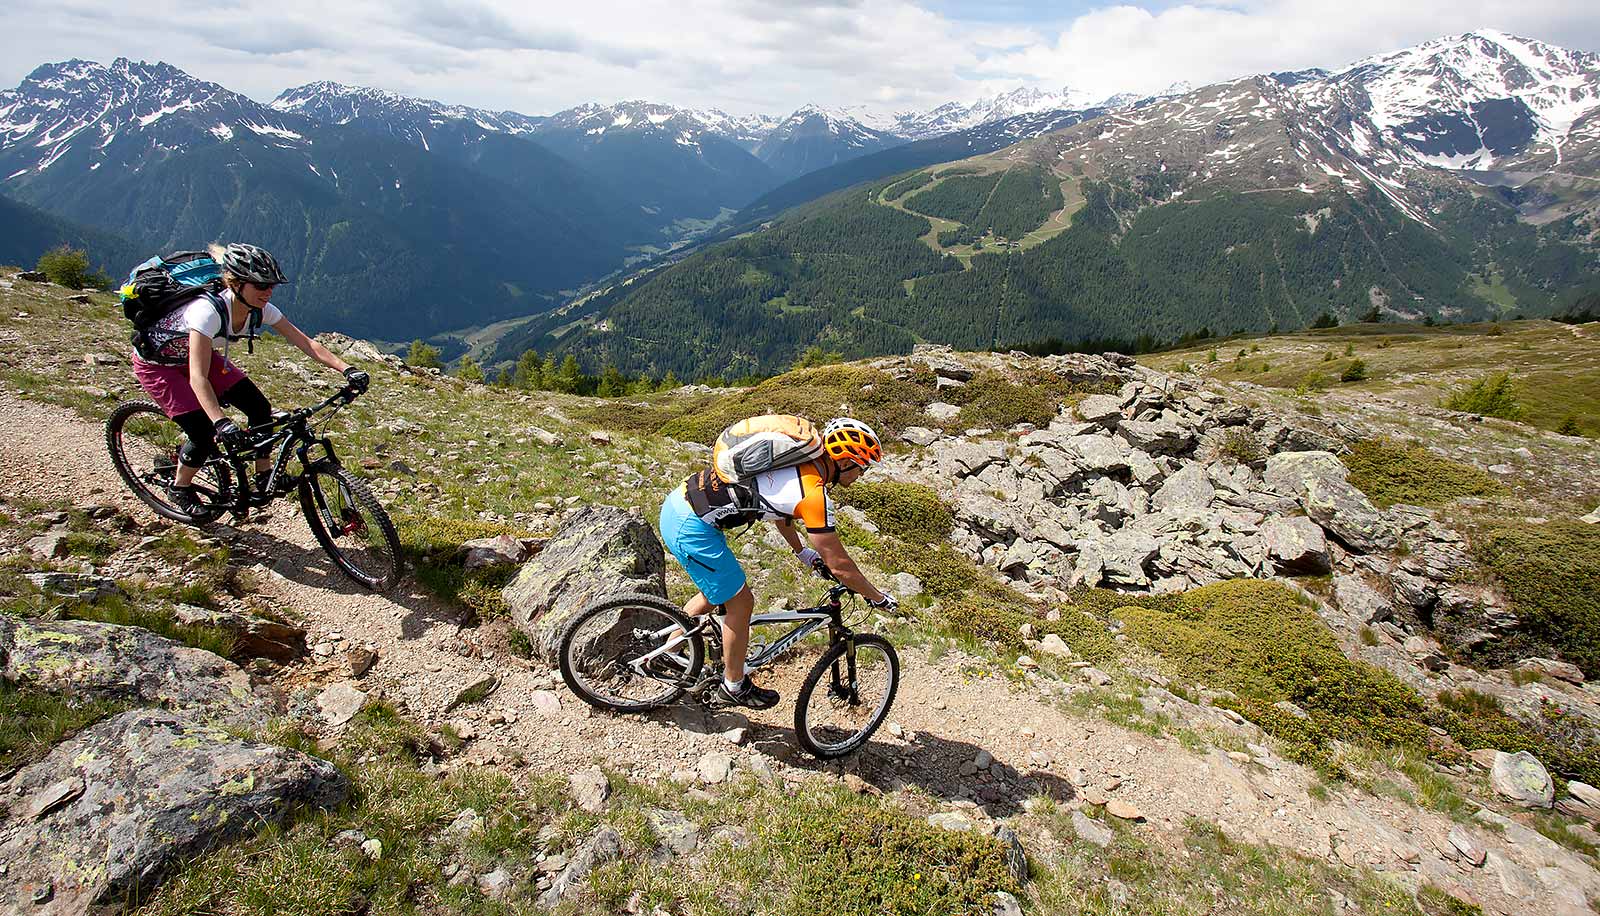 Two Mountain Bikers on a steep mountain path among the rocks with snowy mountains in the background